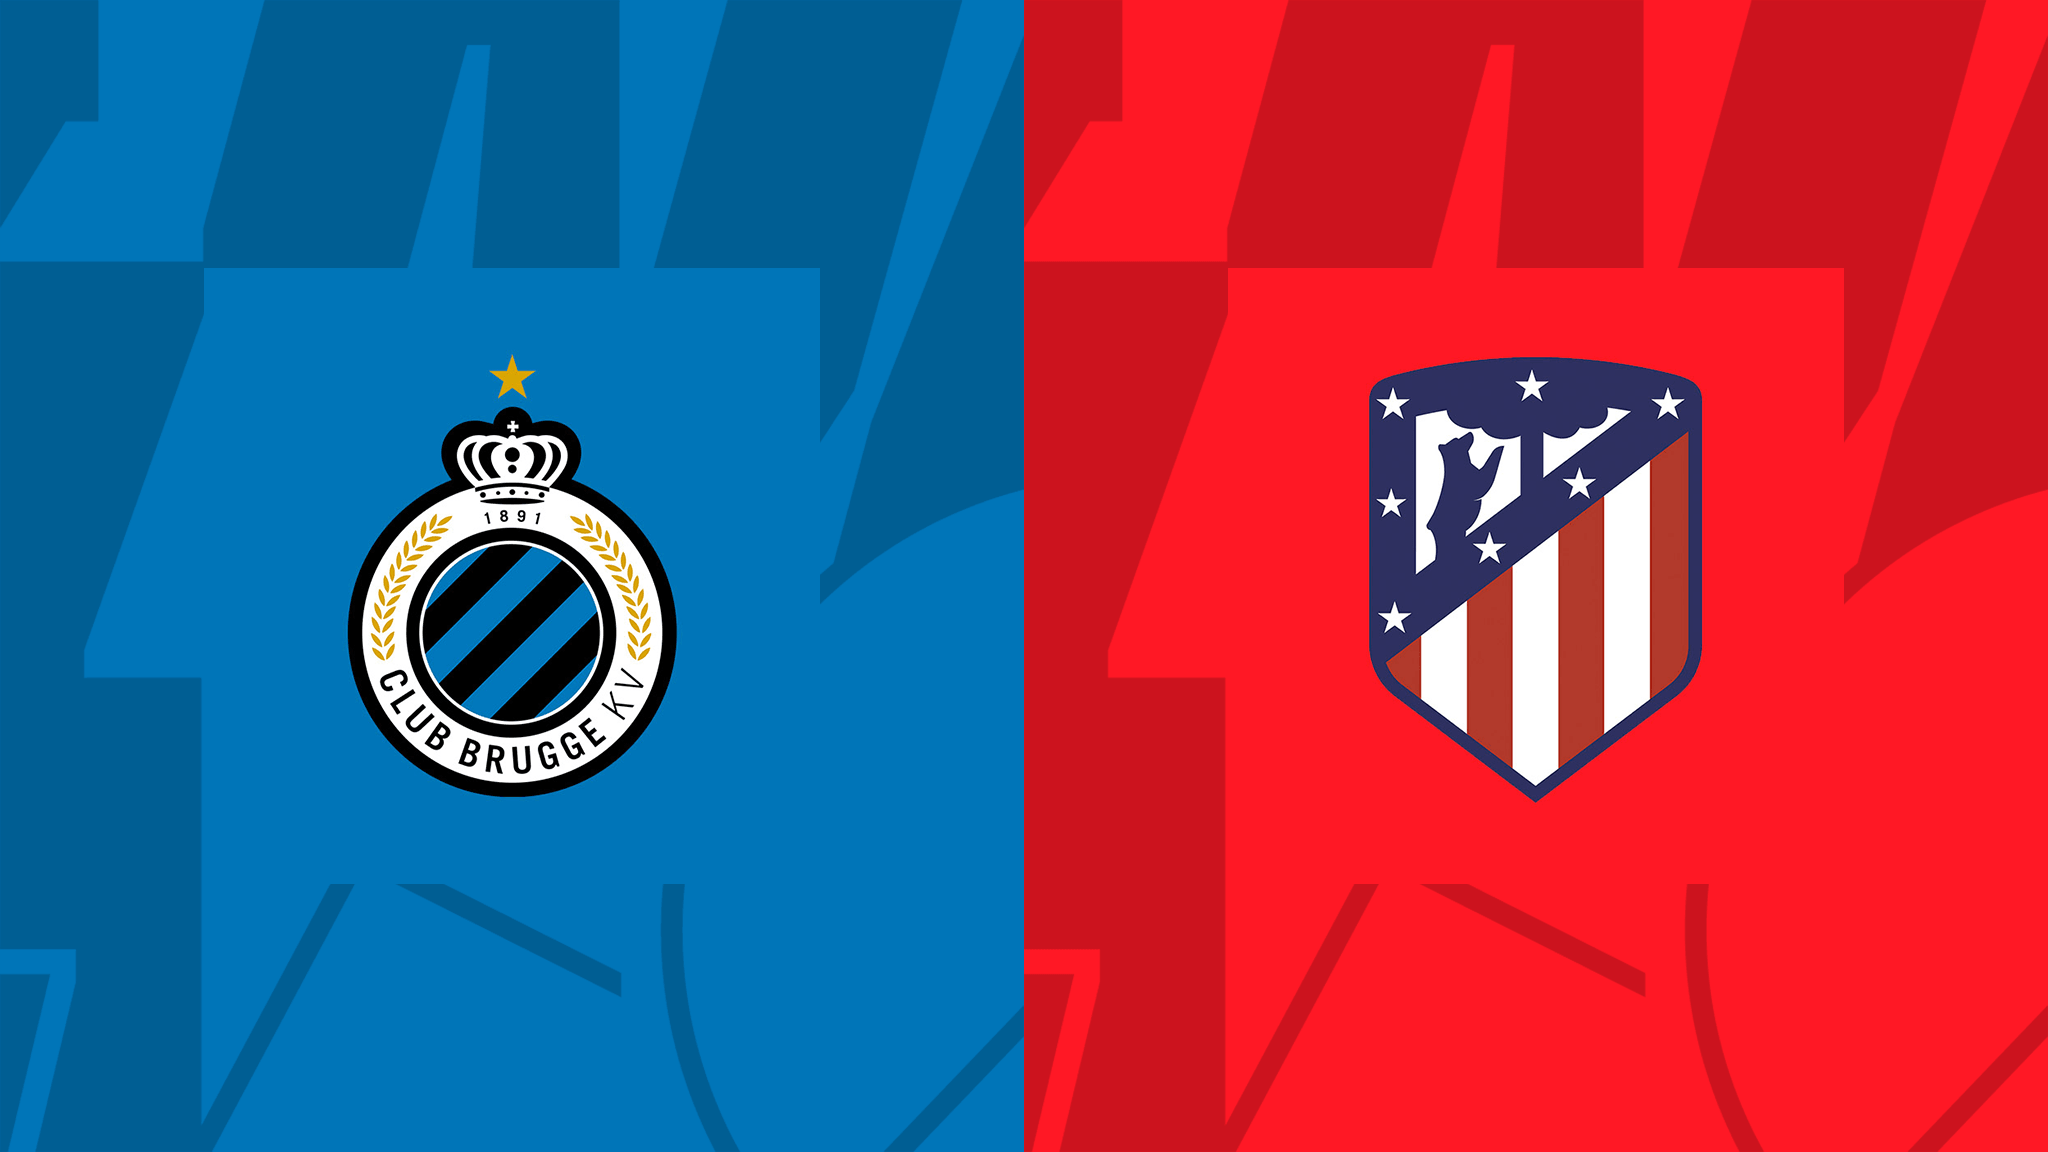 Club Brugge vs Atletico Madrid Match Analysis and Prediction – Sports Betting Tricks